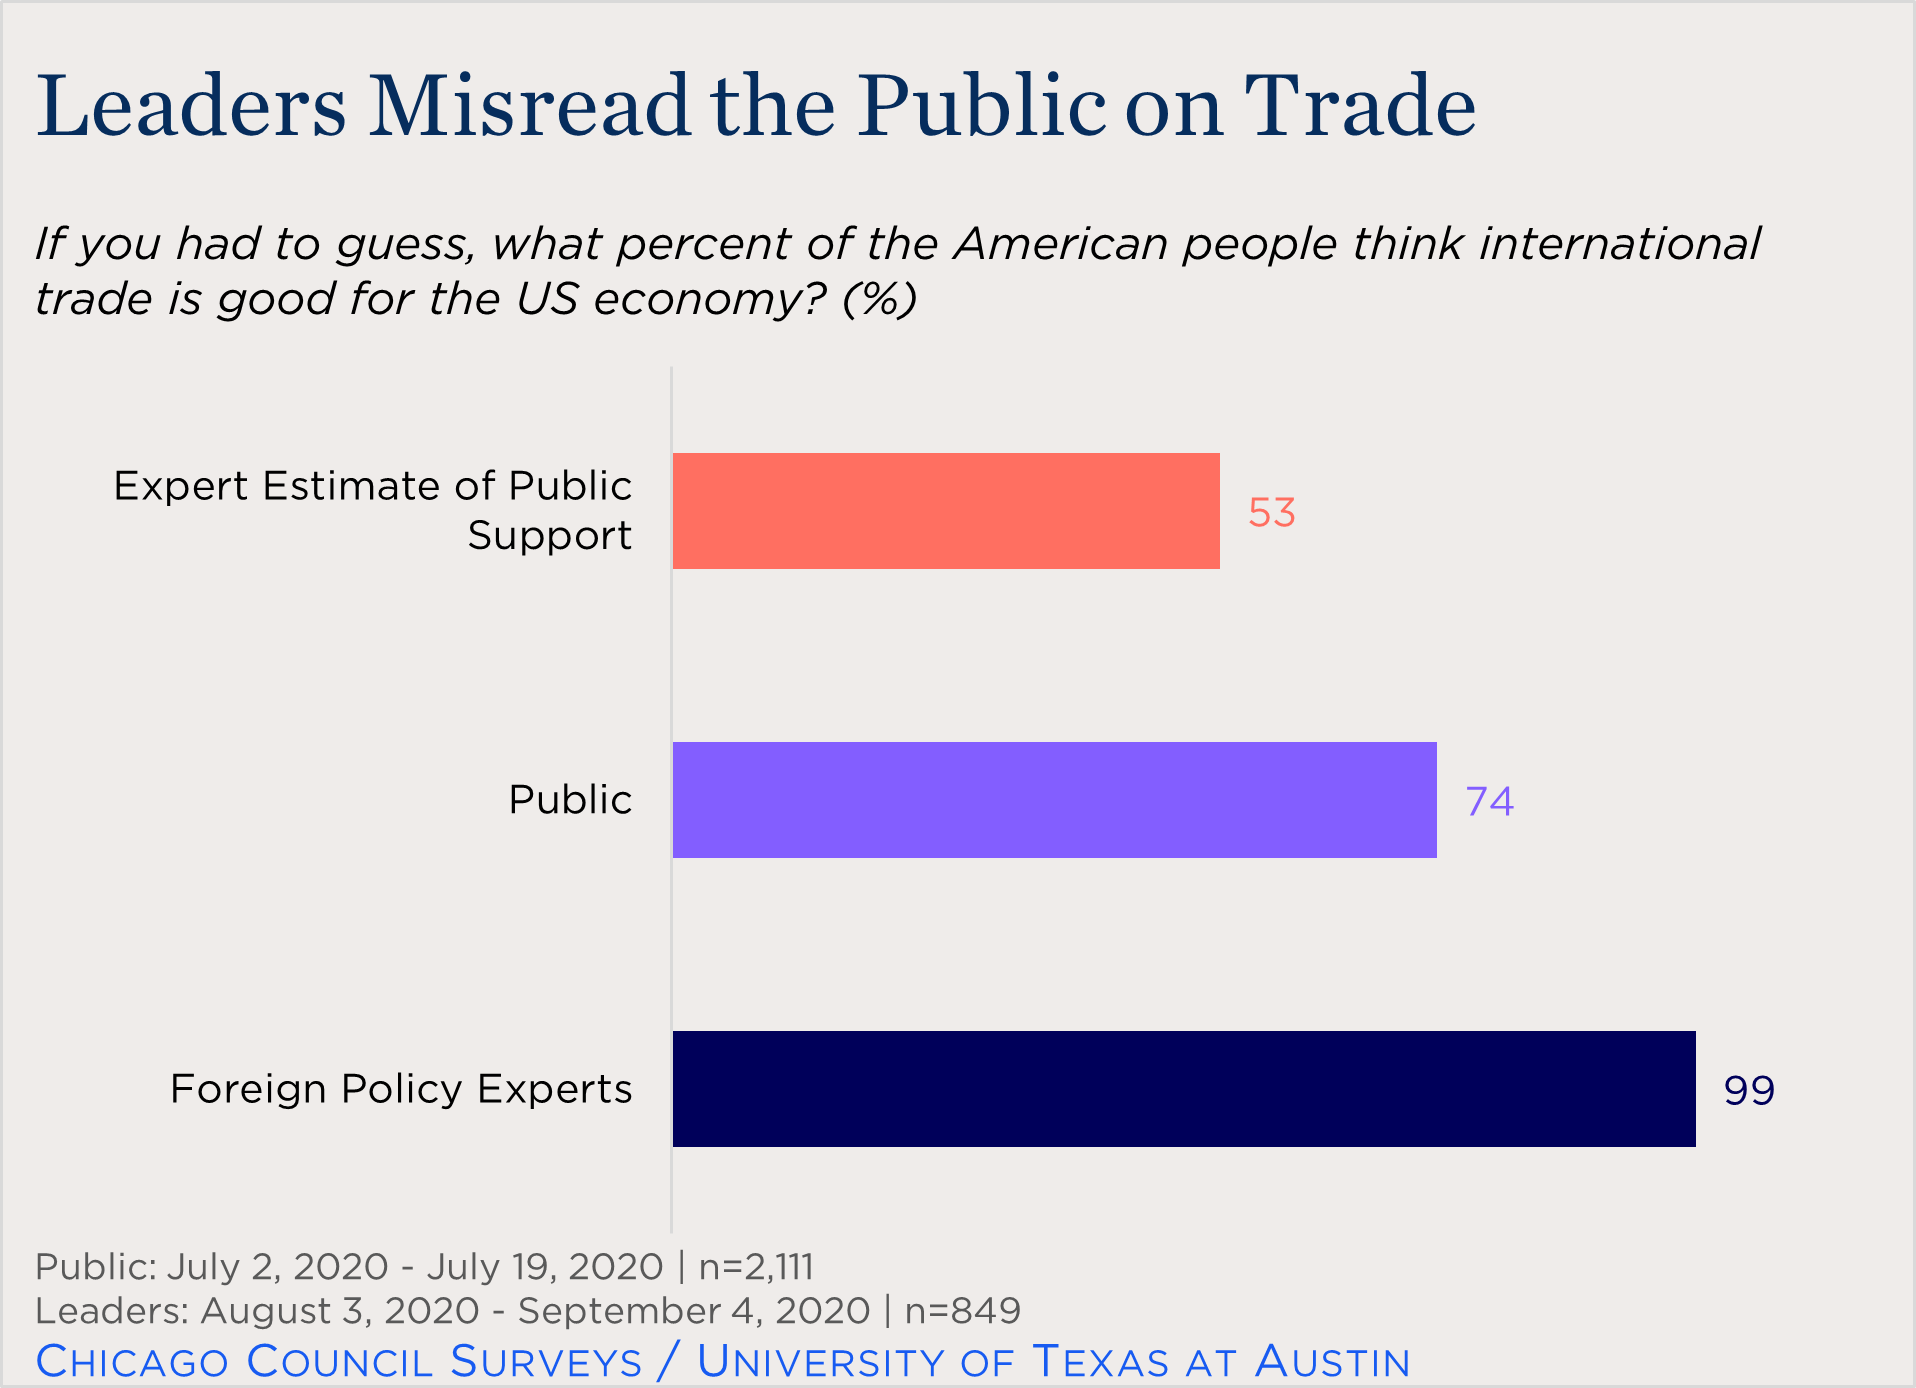 "bar chart showing leaders' misjudgment of public views of trade"